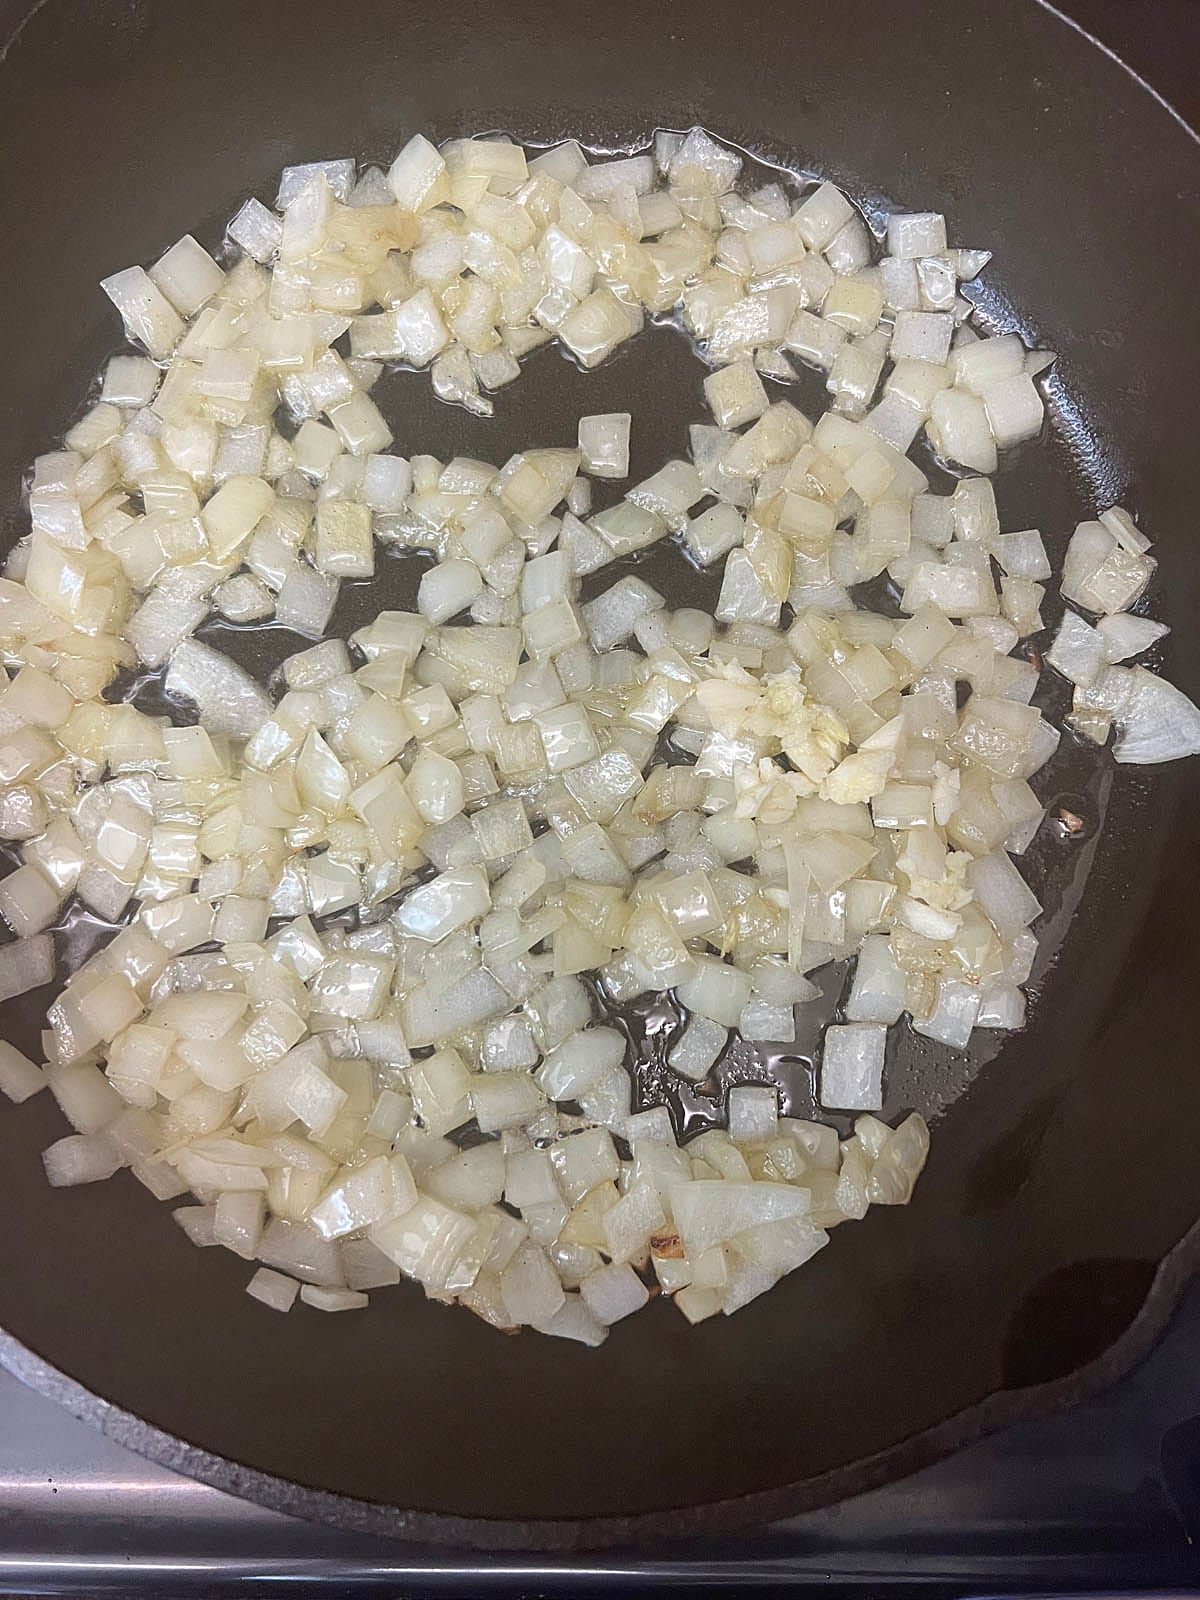 Minced garlic added to the skillet with onions.